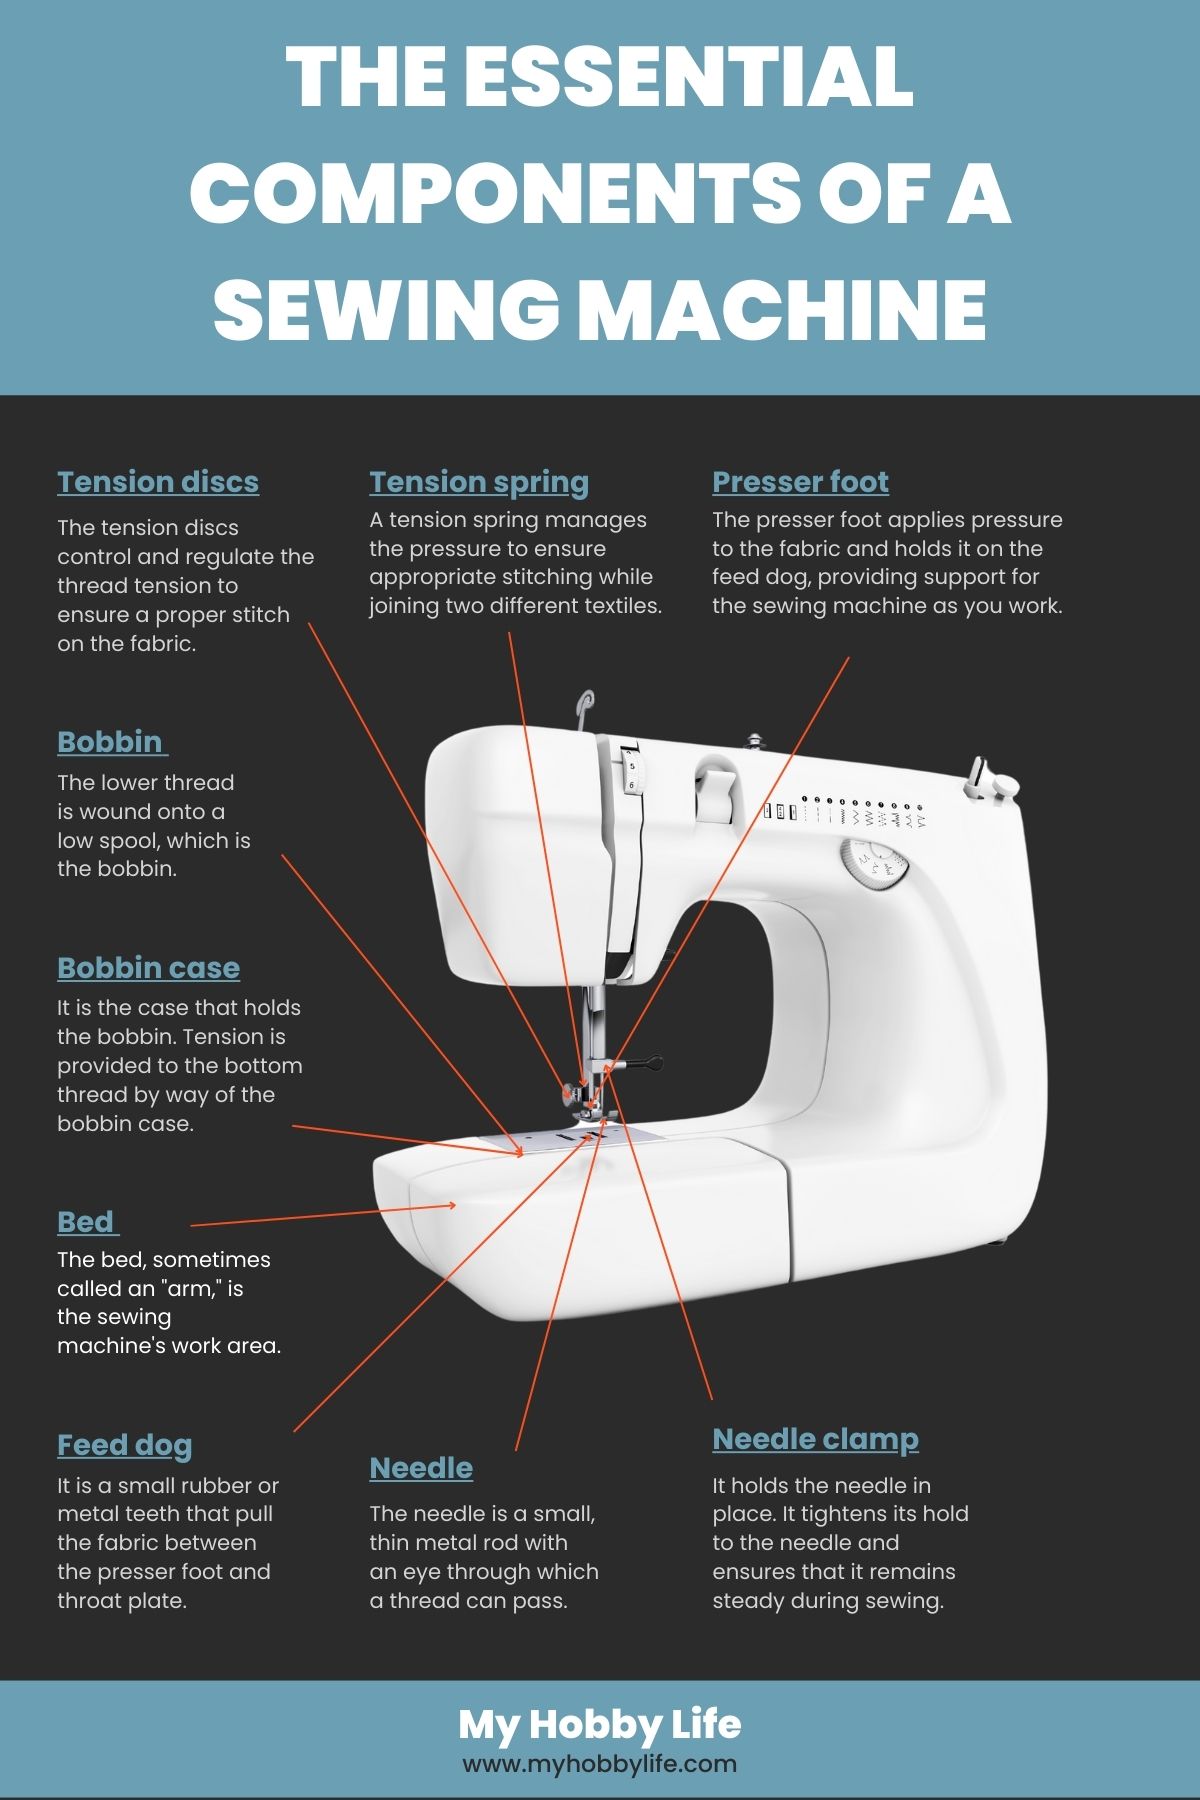 The essential components of a sewing machine